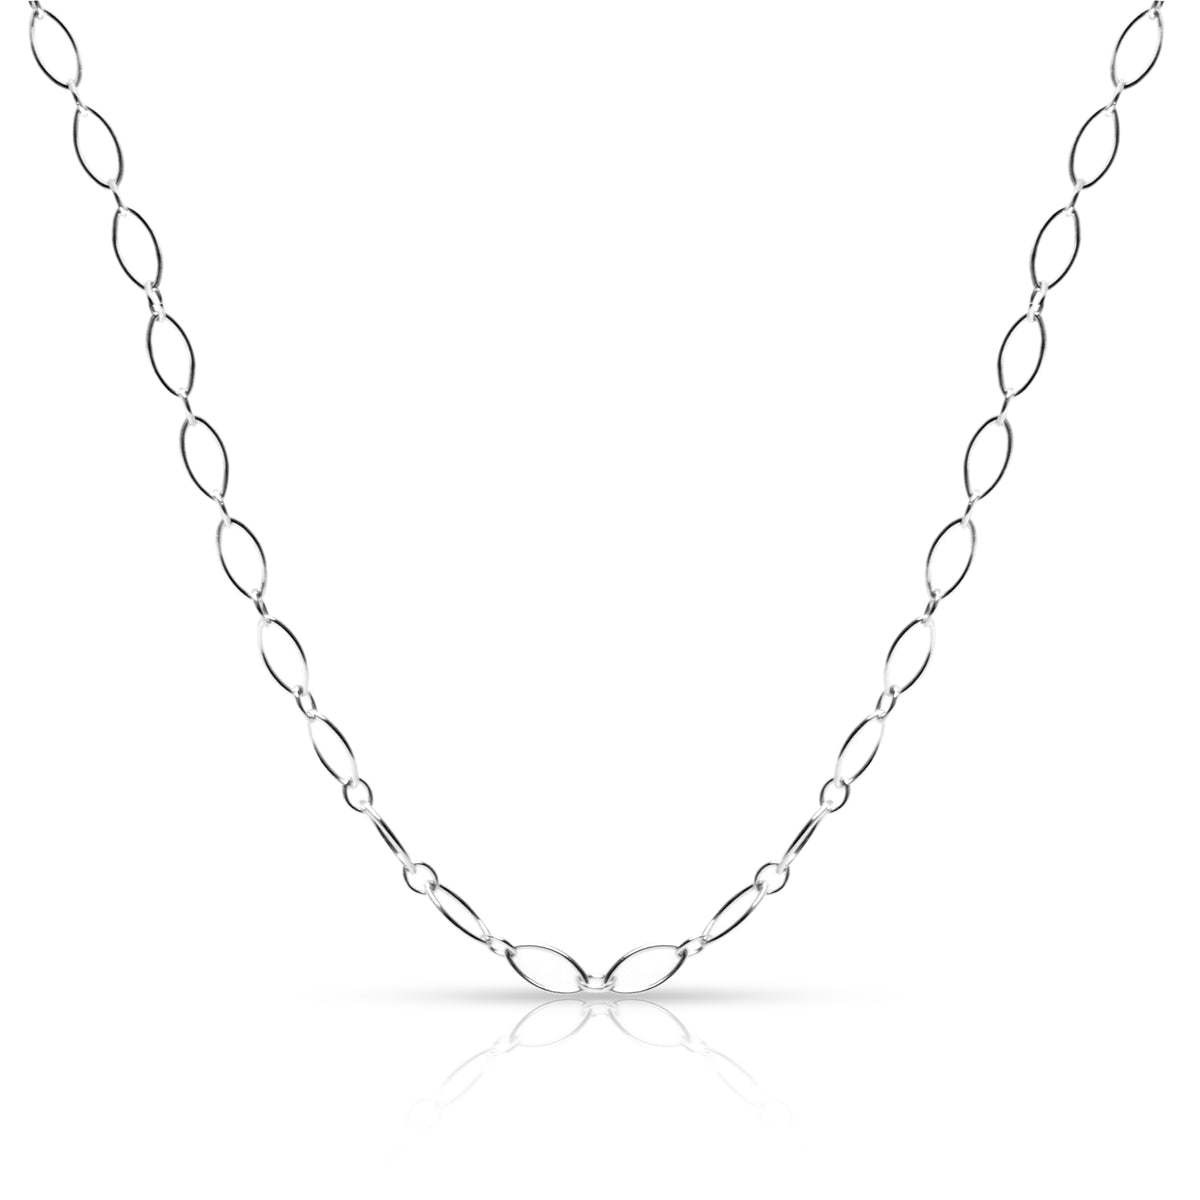 Tiffany & Co. Oval Link Chain in Sterling Silver (16